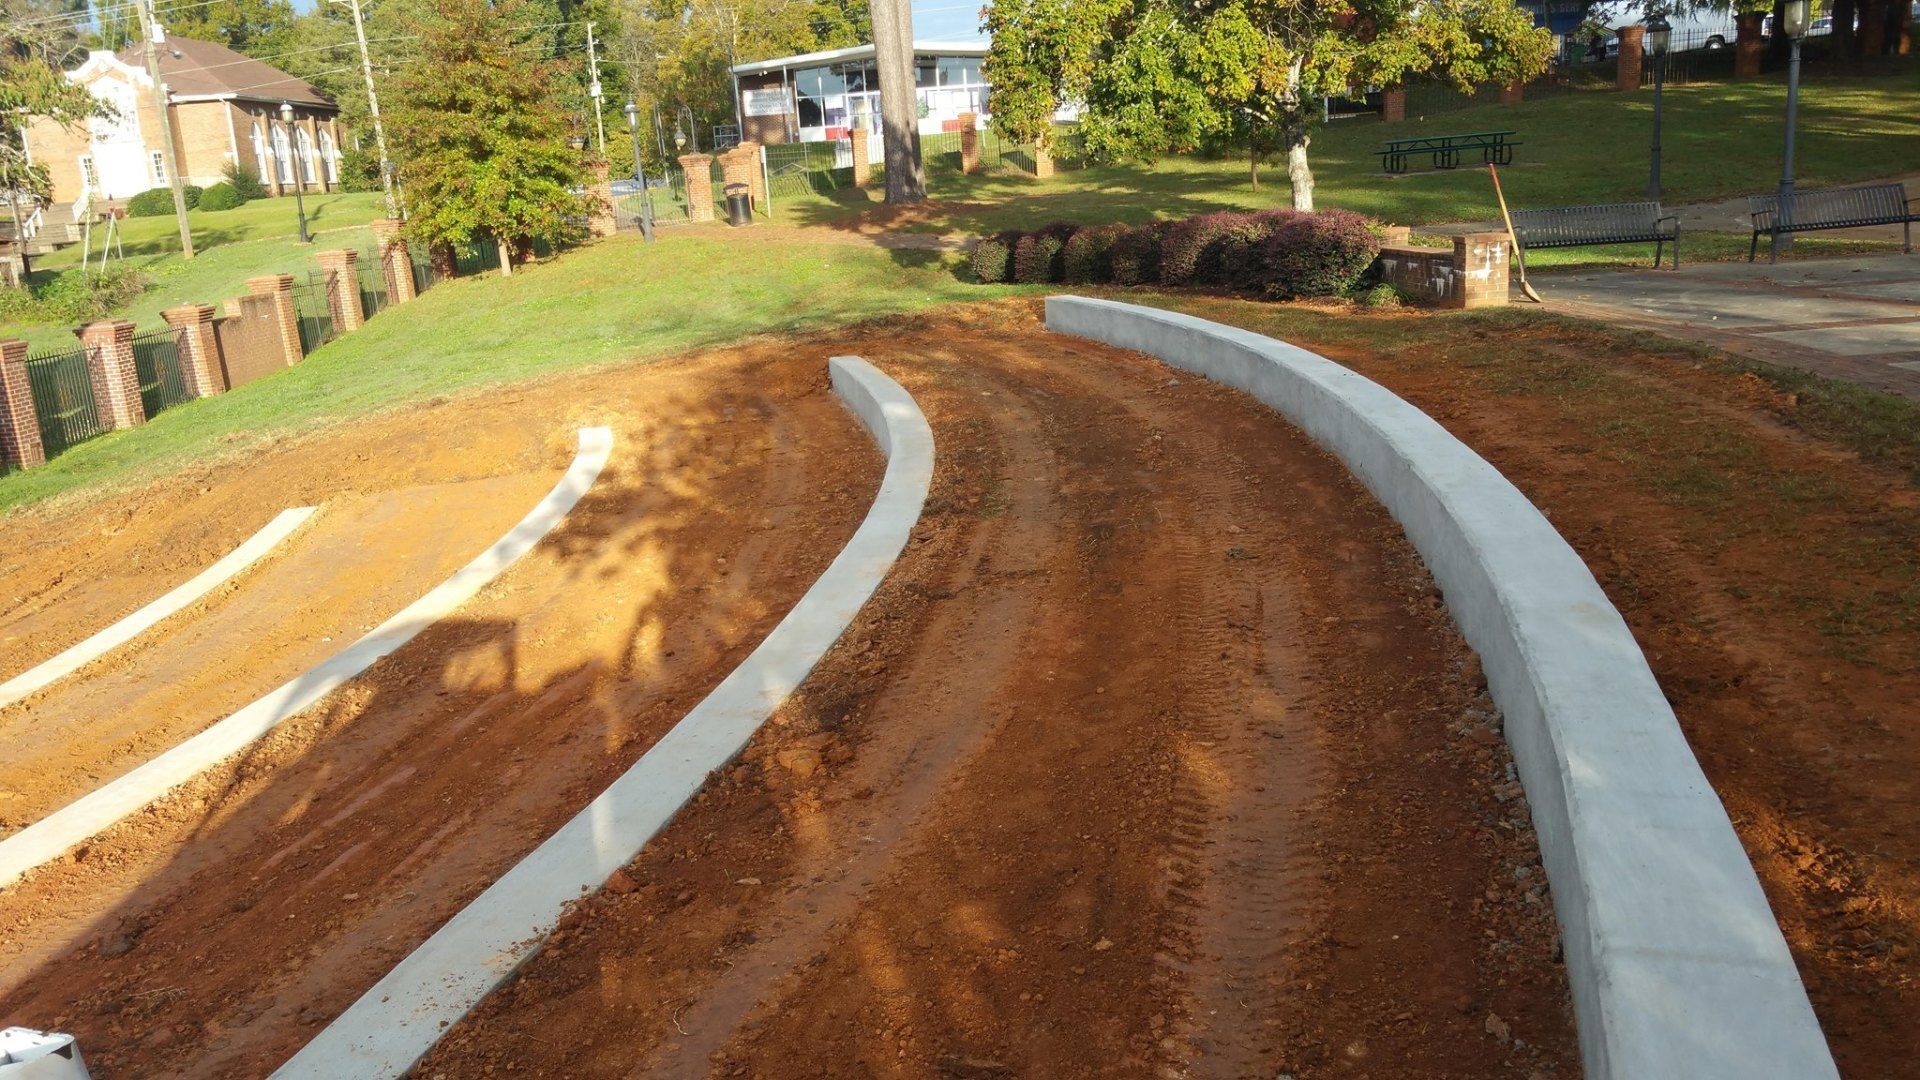 Driveways - New Construct Driveway in Greenwood, SC